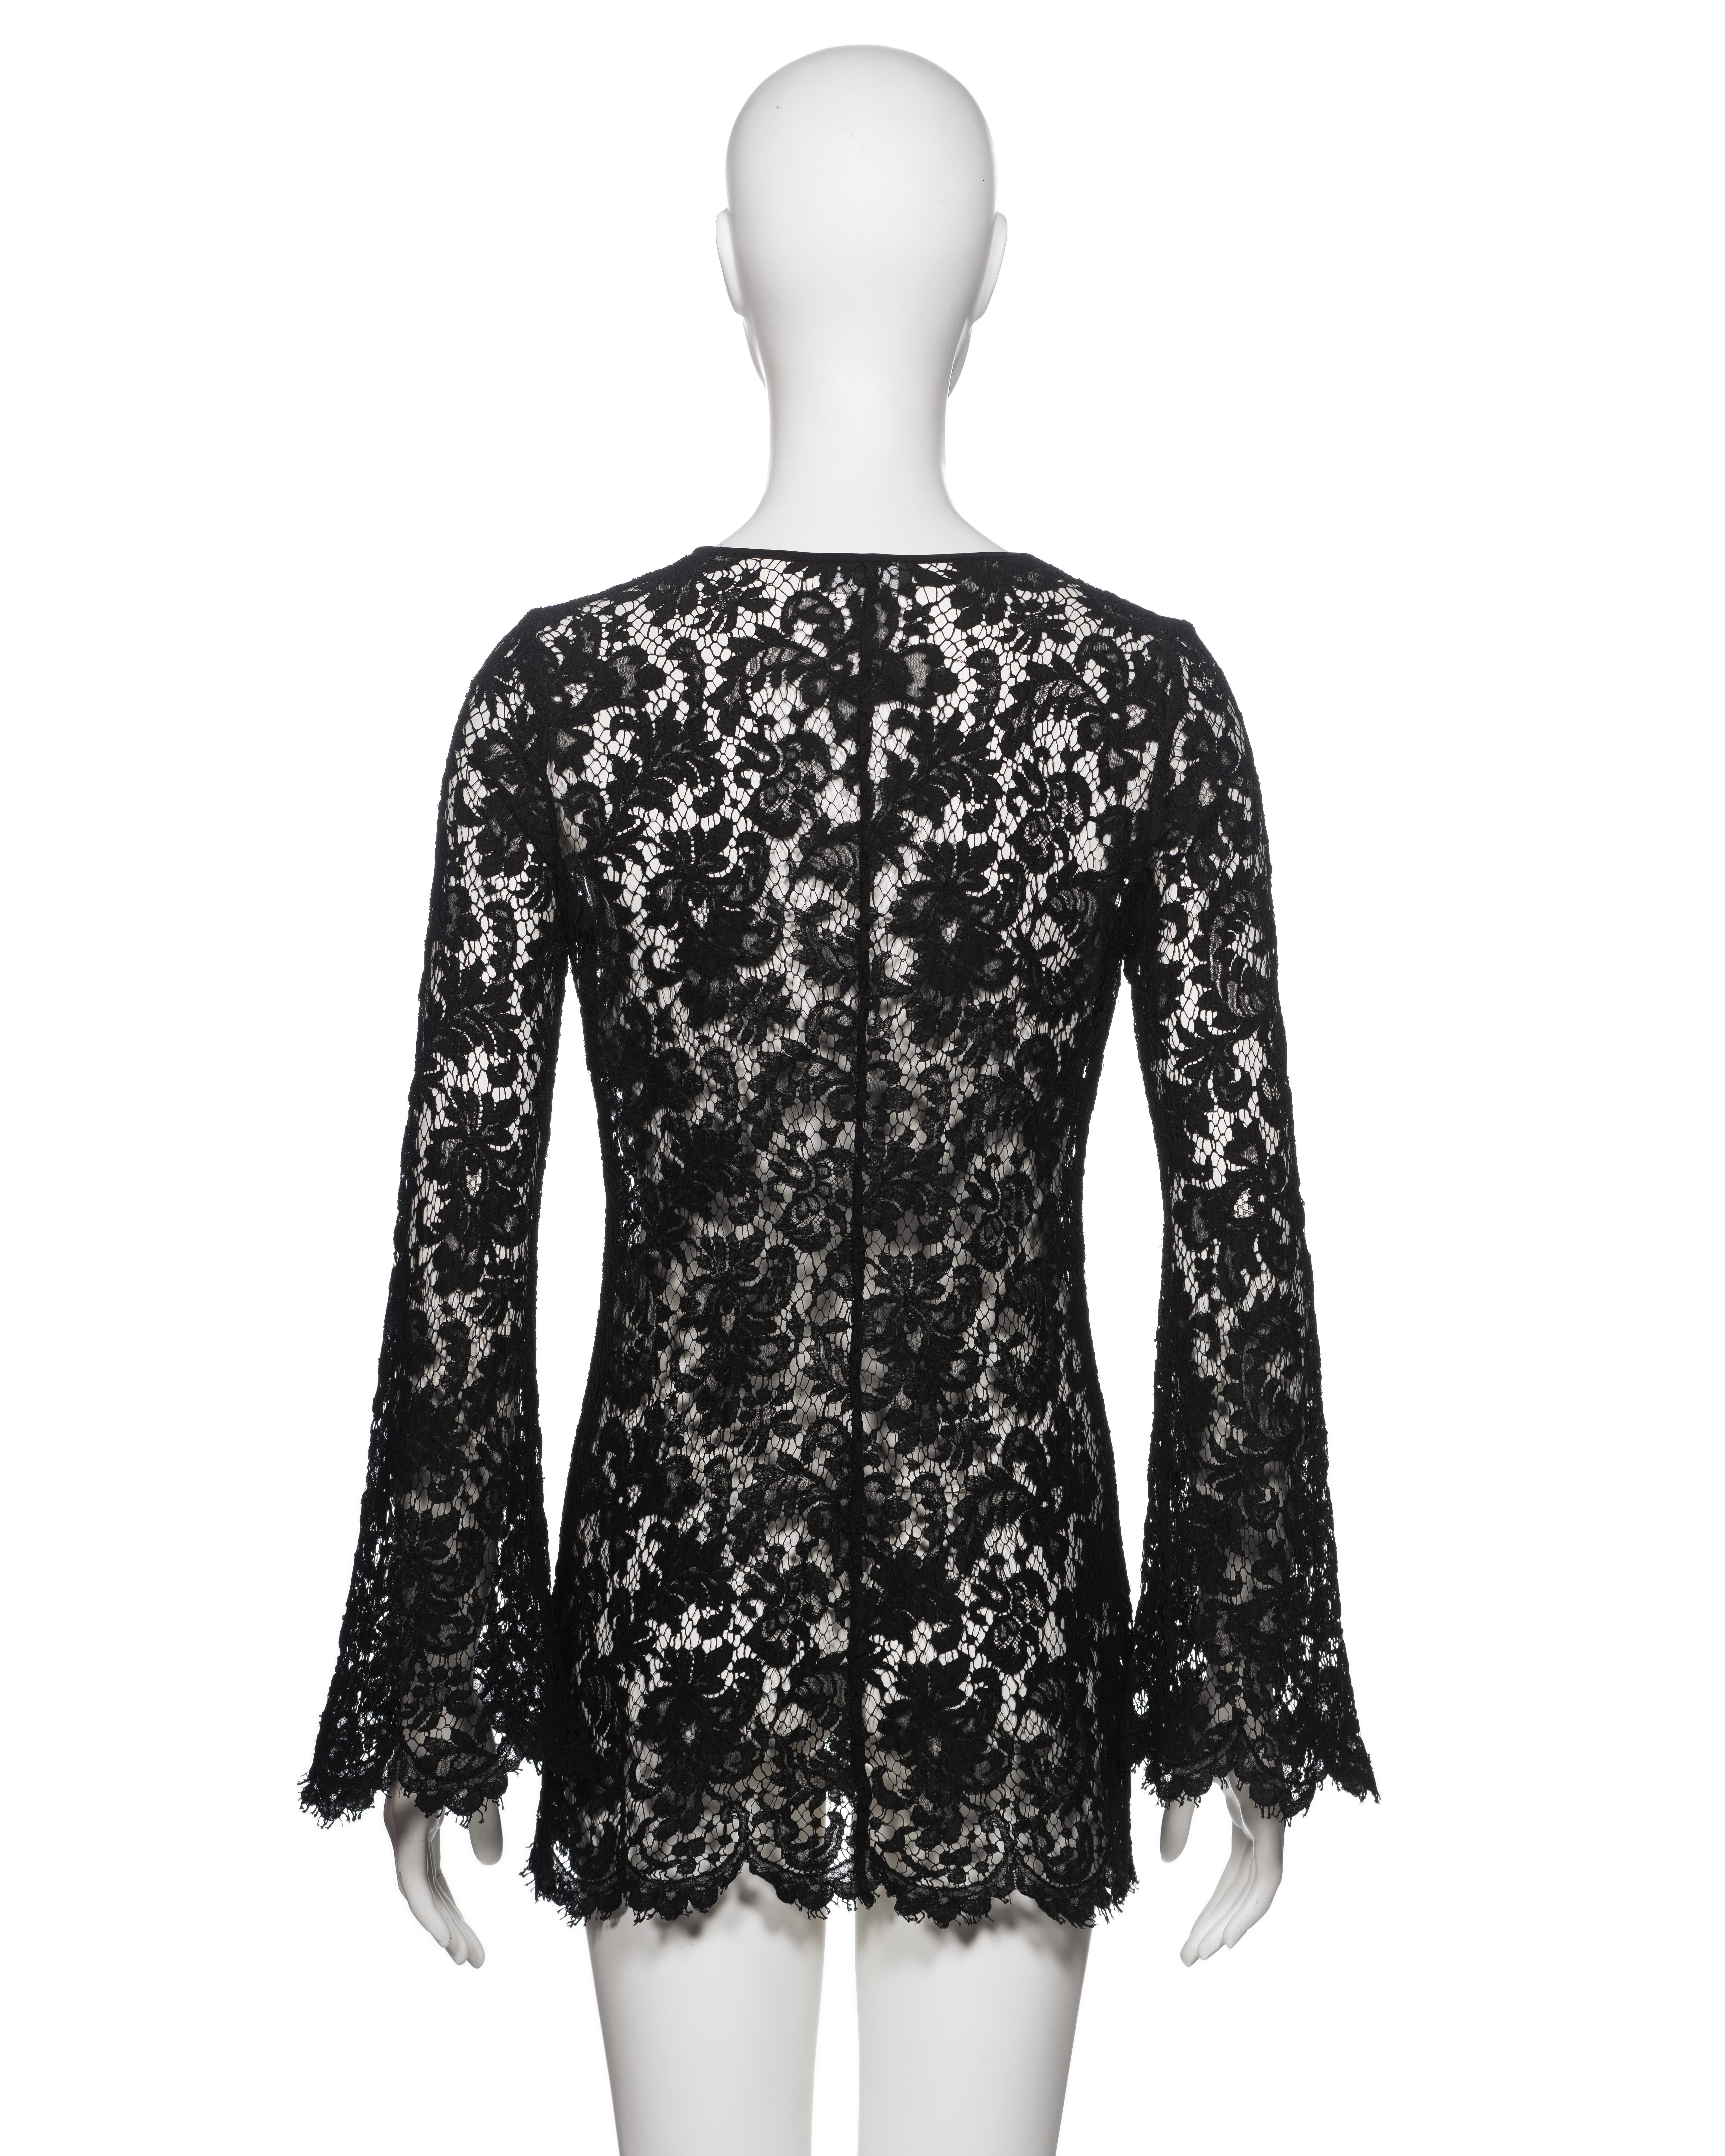 Gucci by Tom Ford Black Lace Long Sleeve Micro Mini Dress, SS 1996 For Sale 5